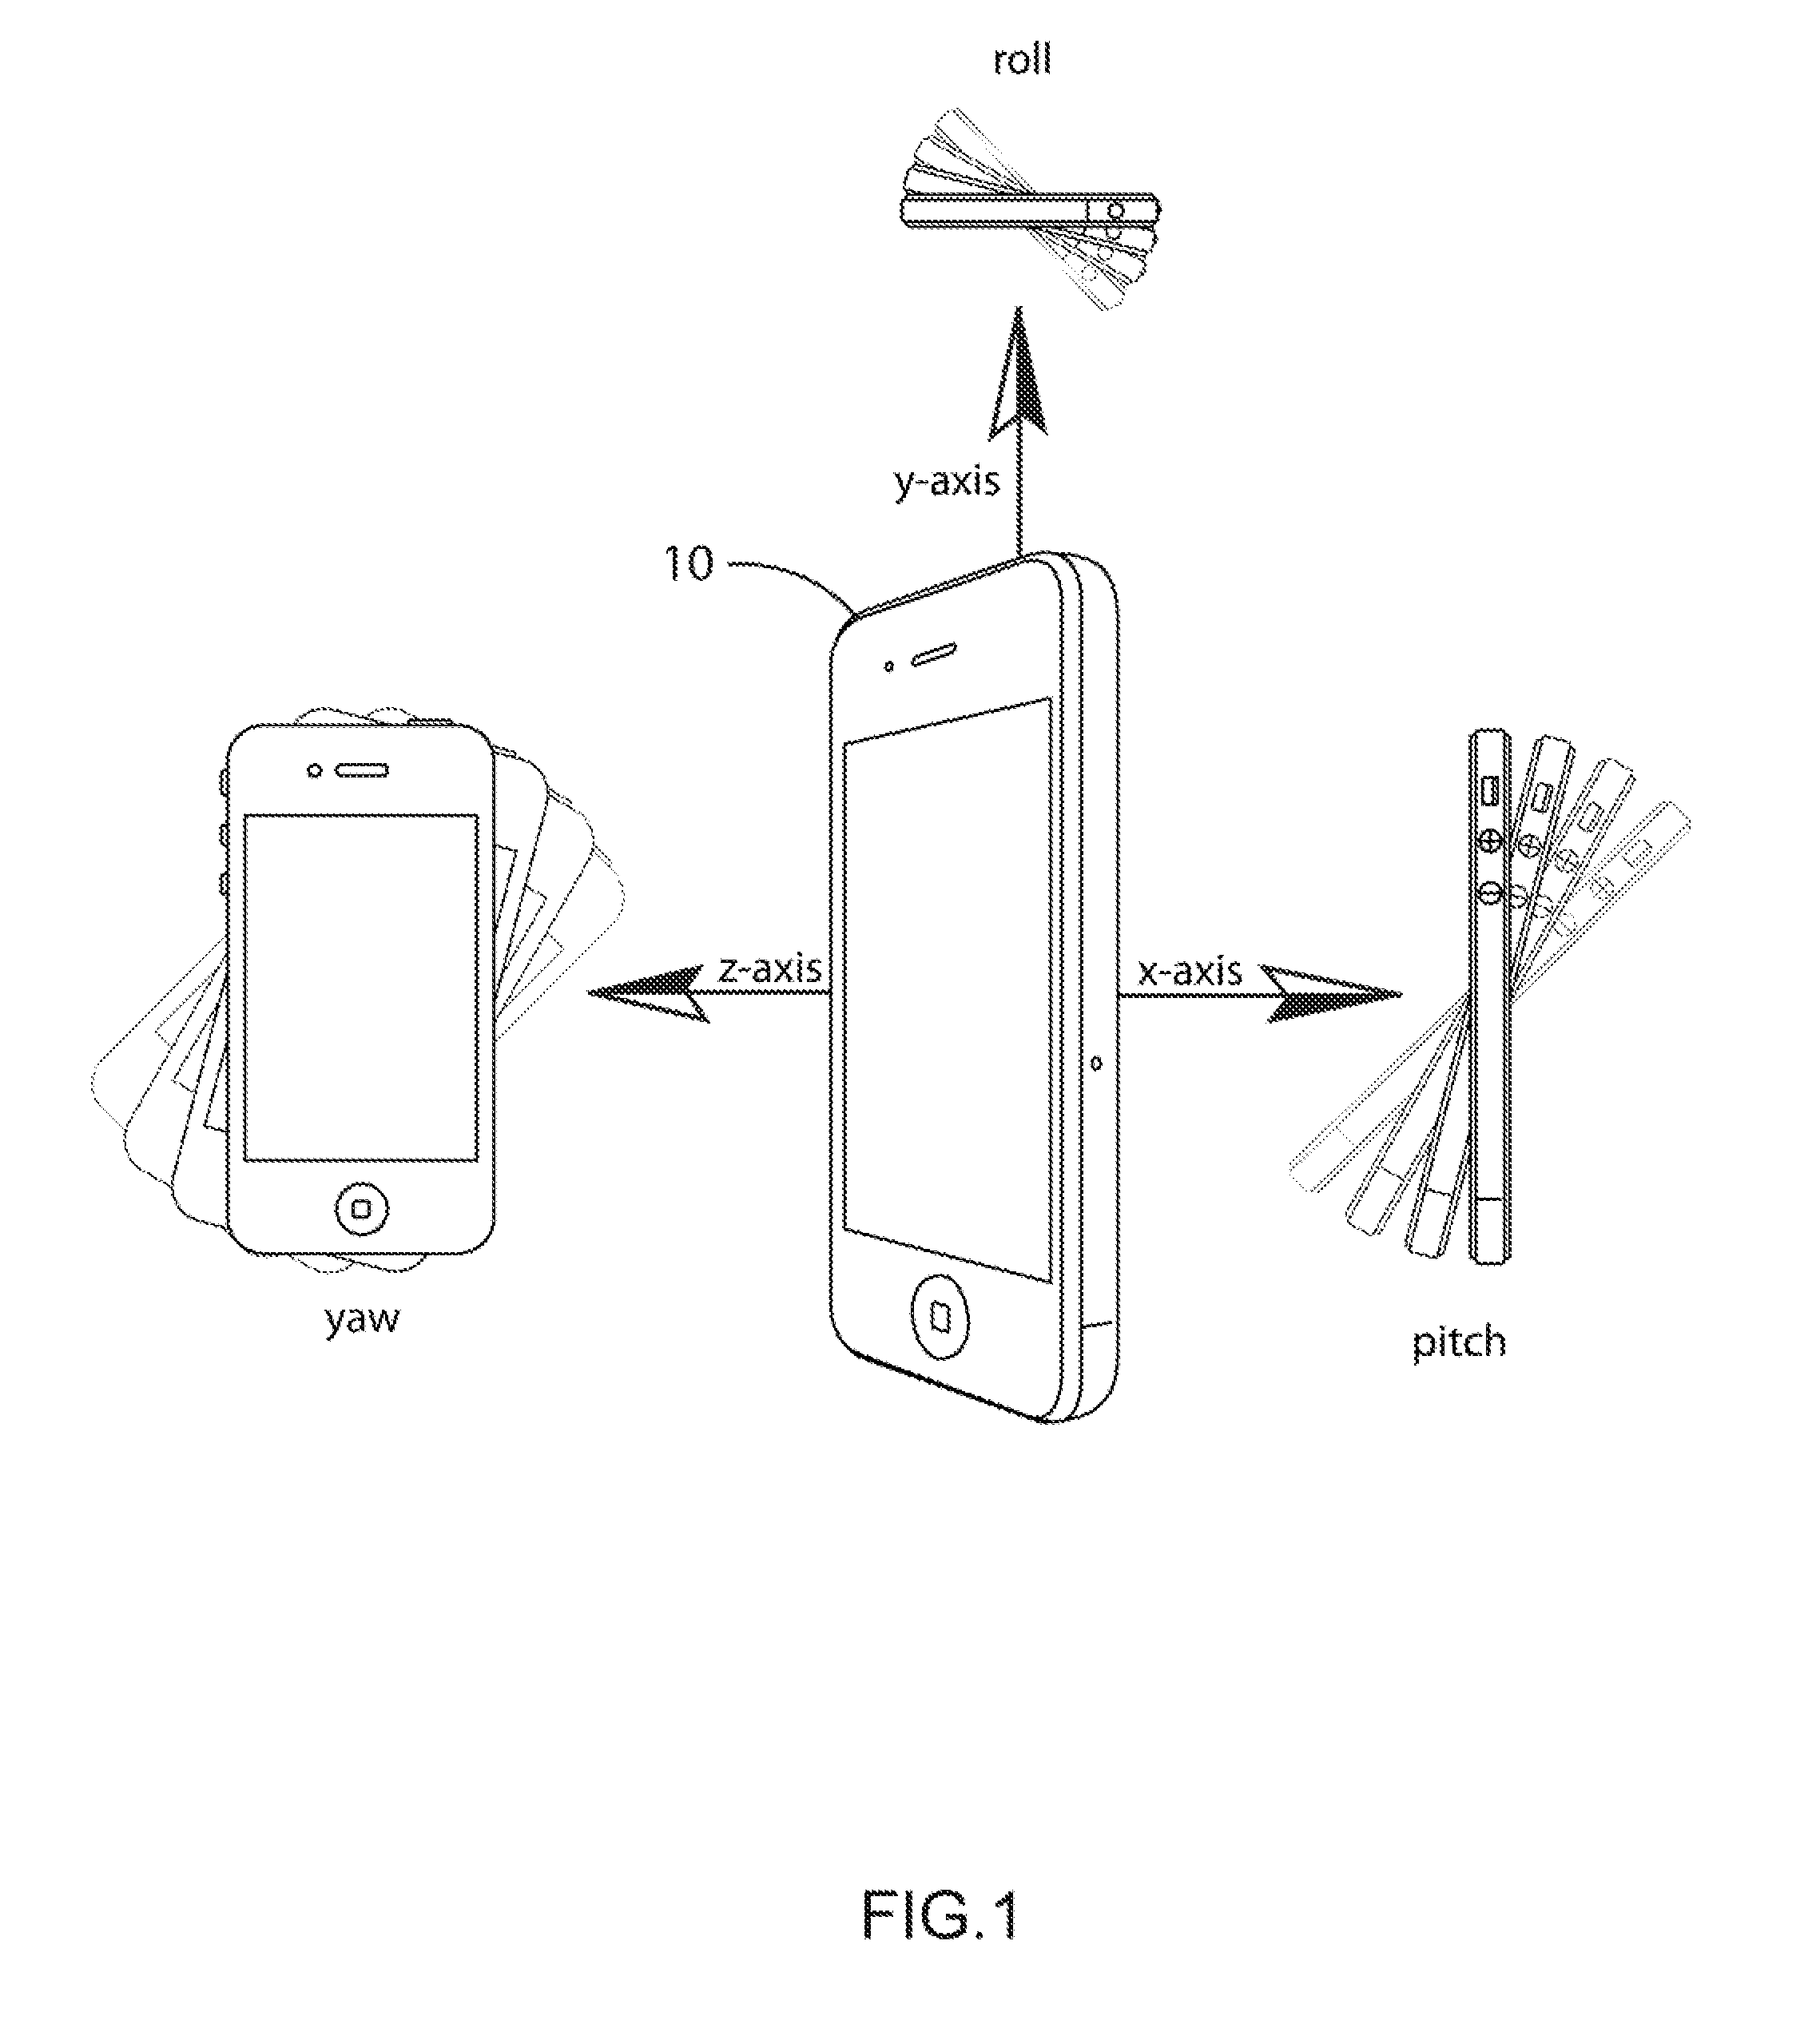 Method and system to analyze sports motions using motion sensors of a mobile device